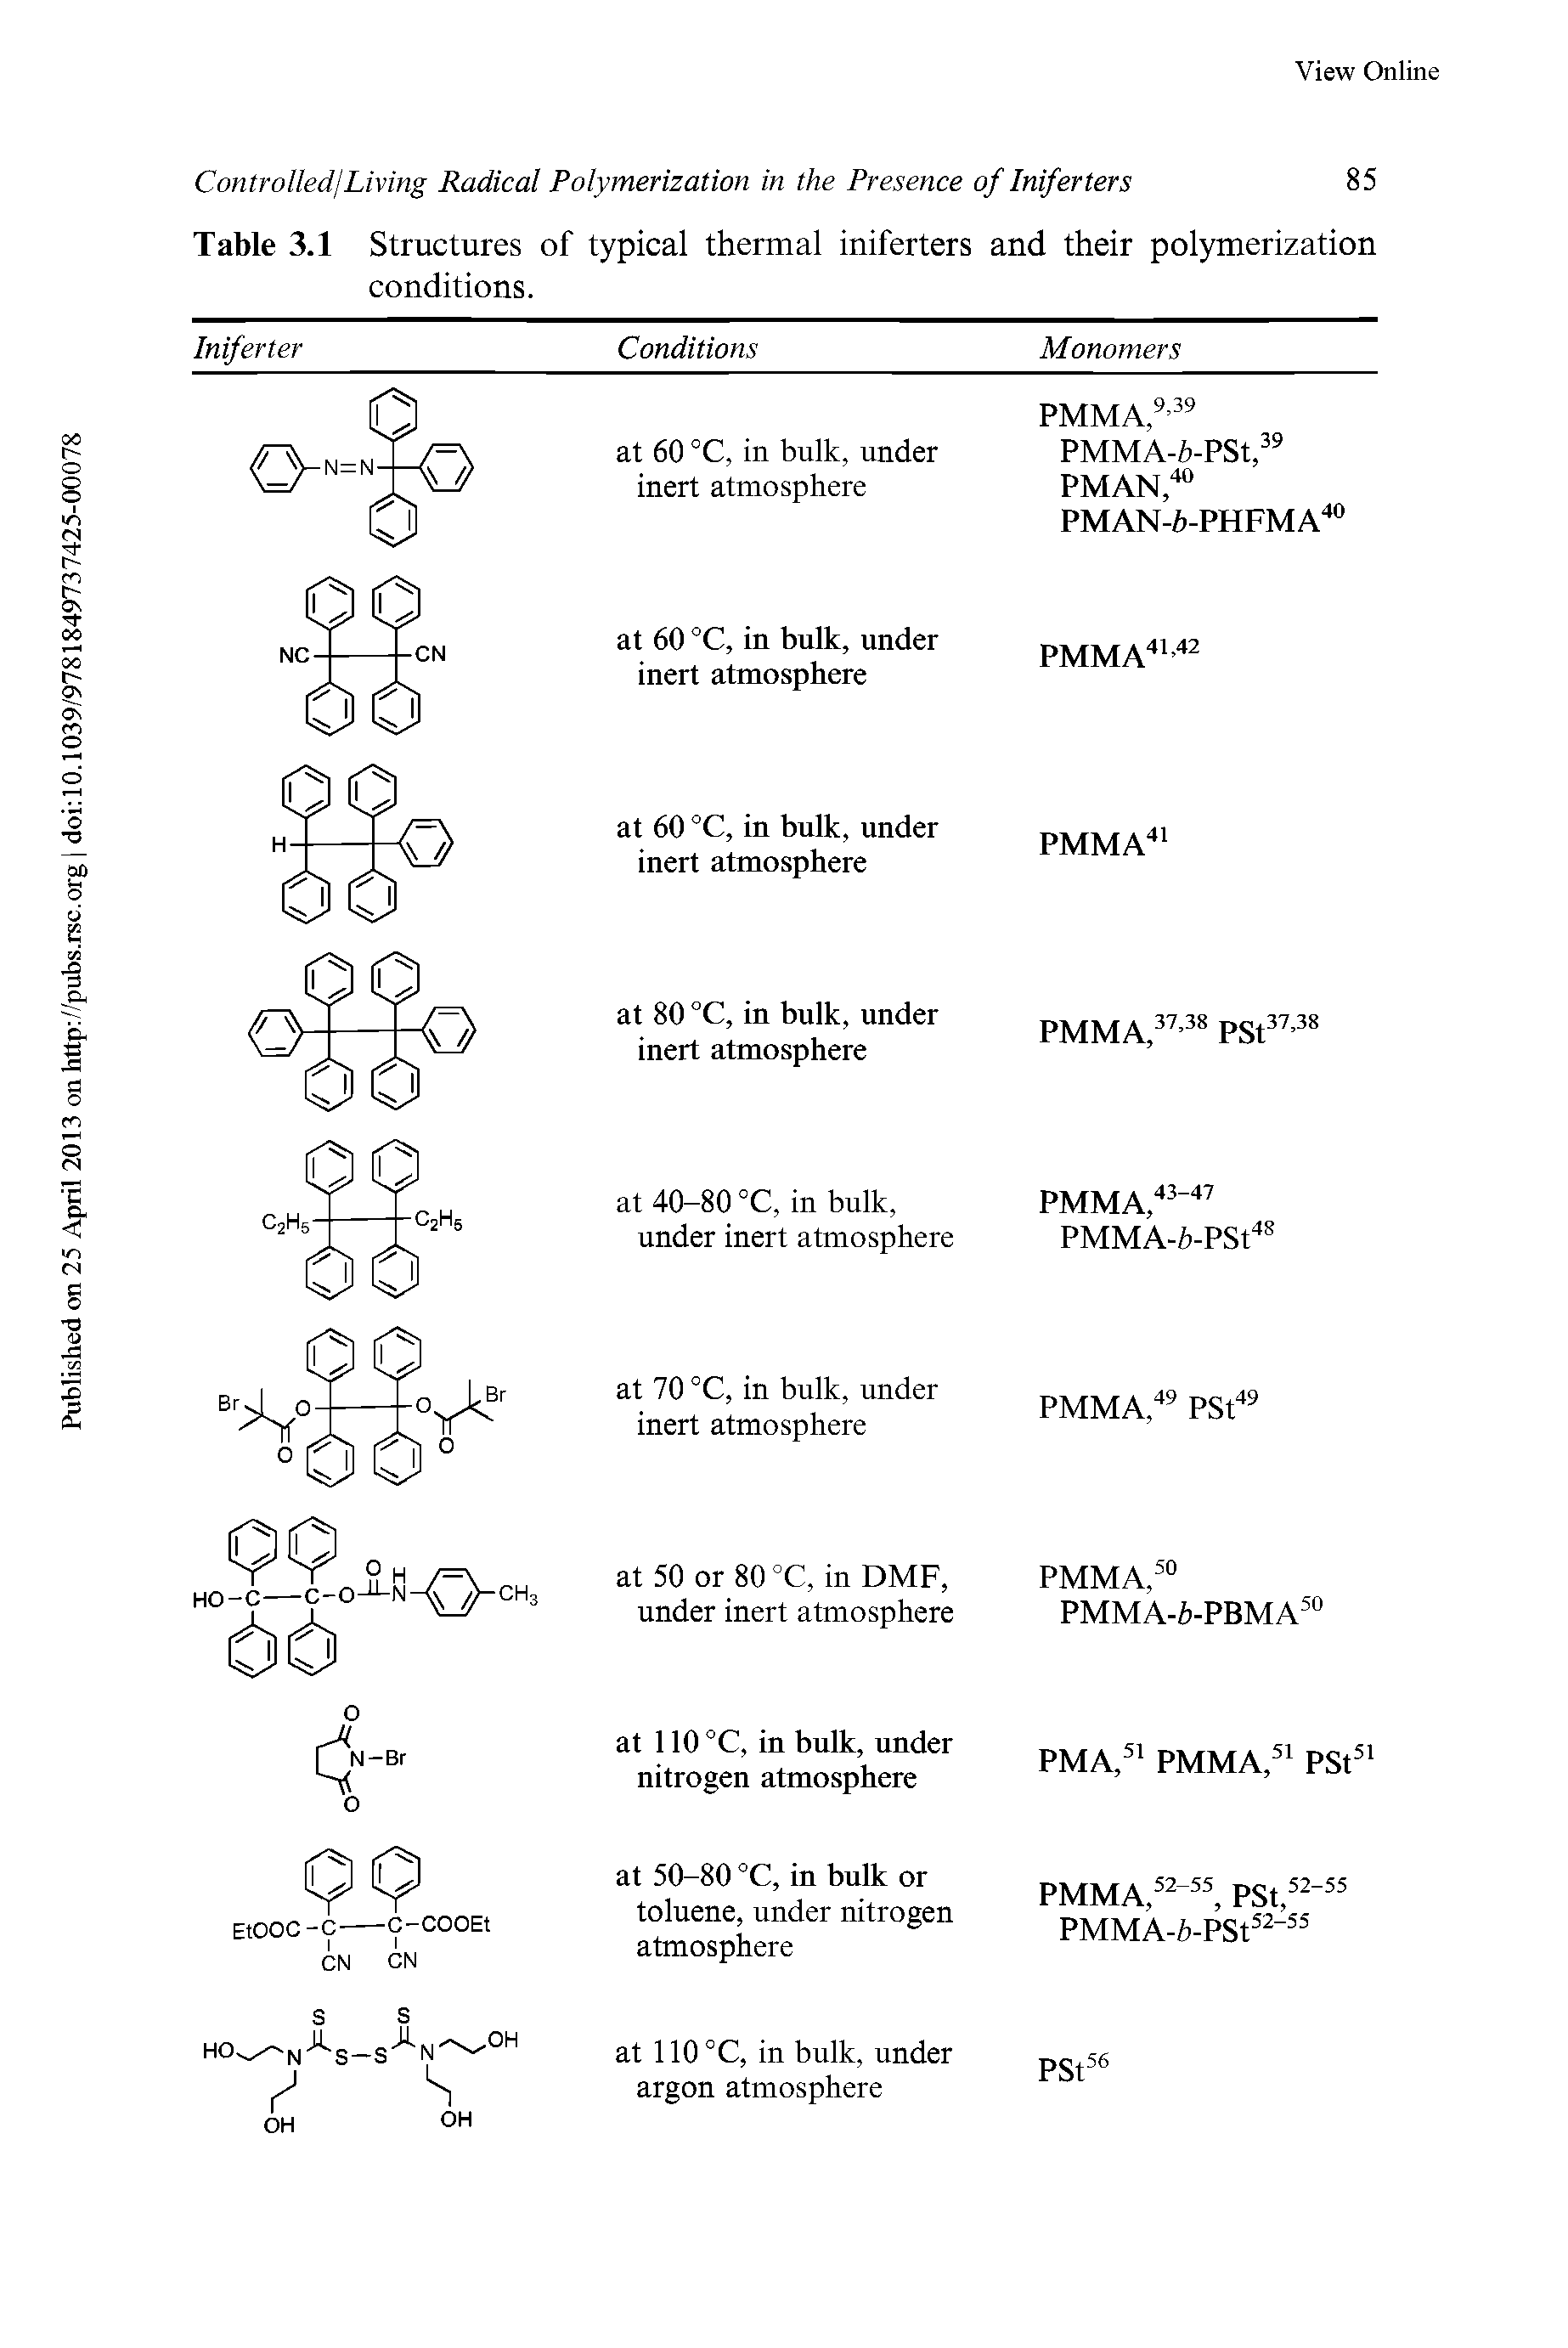 Table 3.1 Structures of typical thermal iniferters and their polymerization conditions.